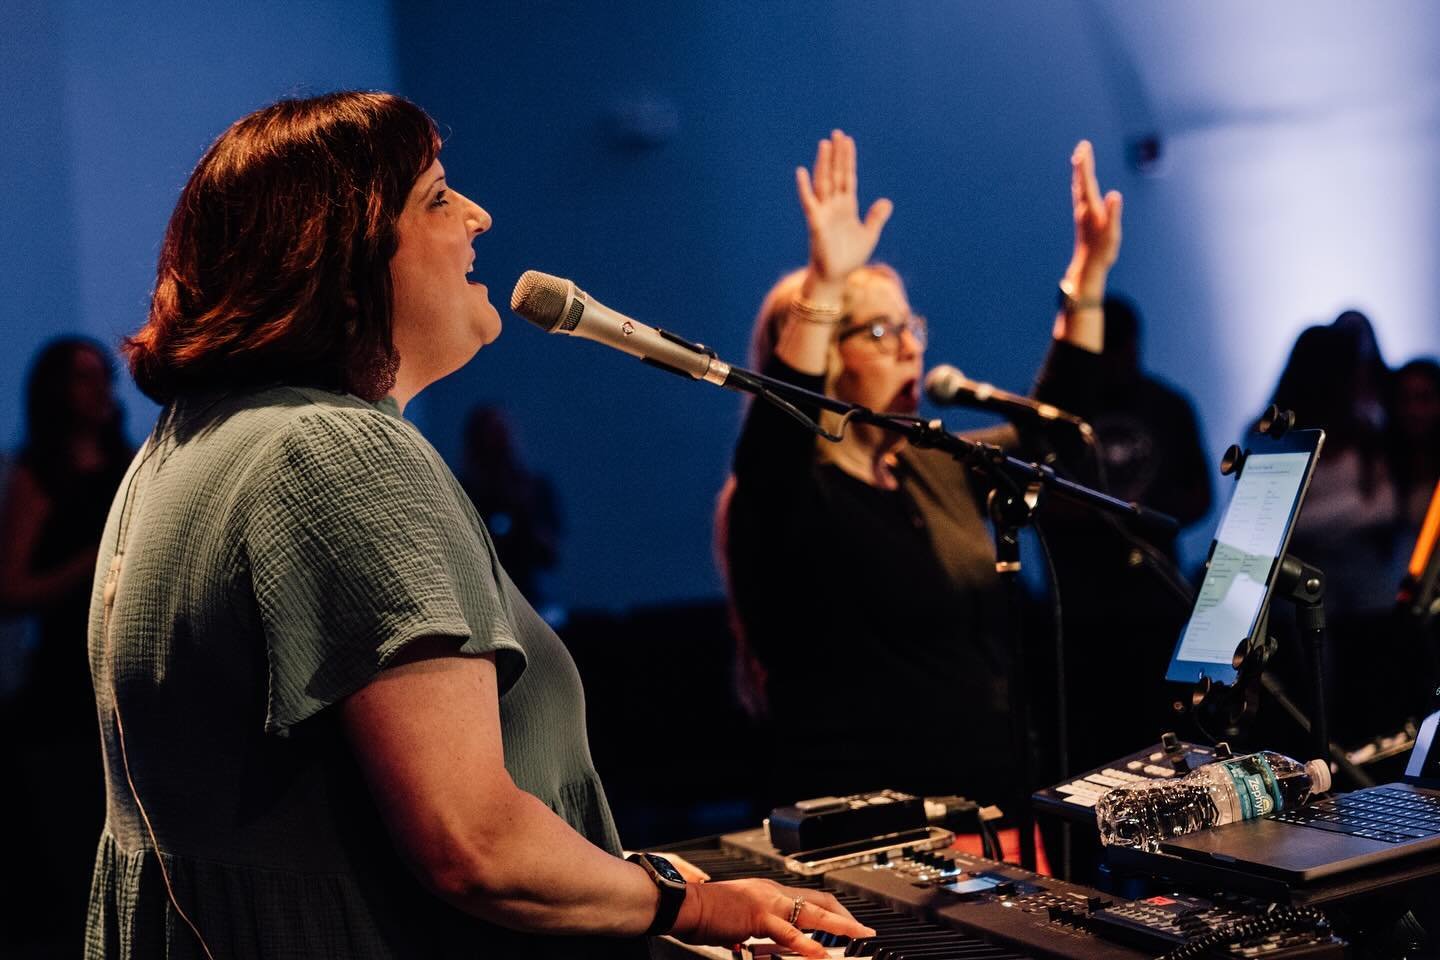 Join us this weekend and discover the incredible strength and peace that comes from being part of a loving community. Can&rsquo;t wait to see you there! #church